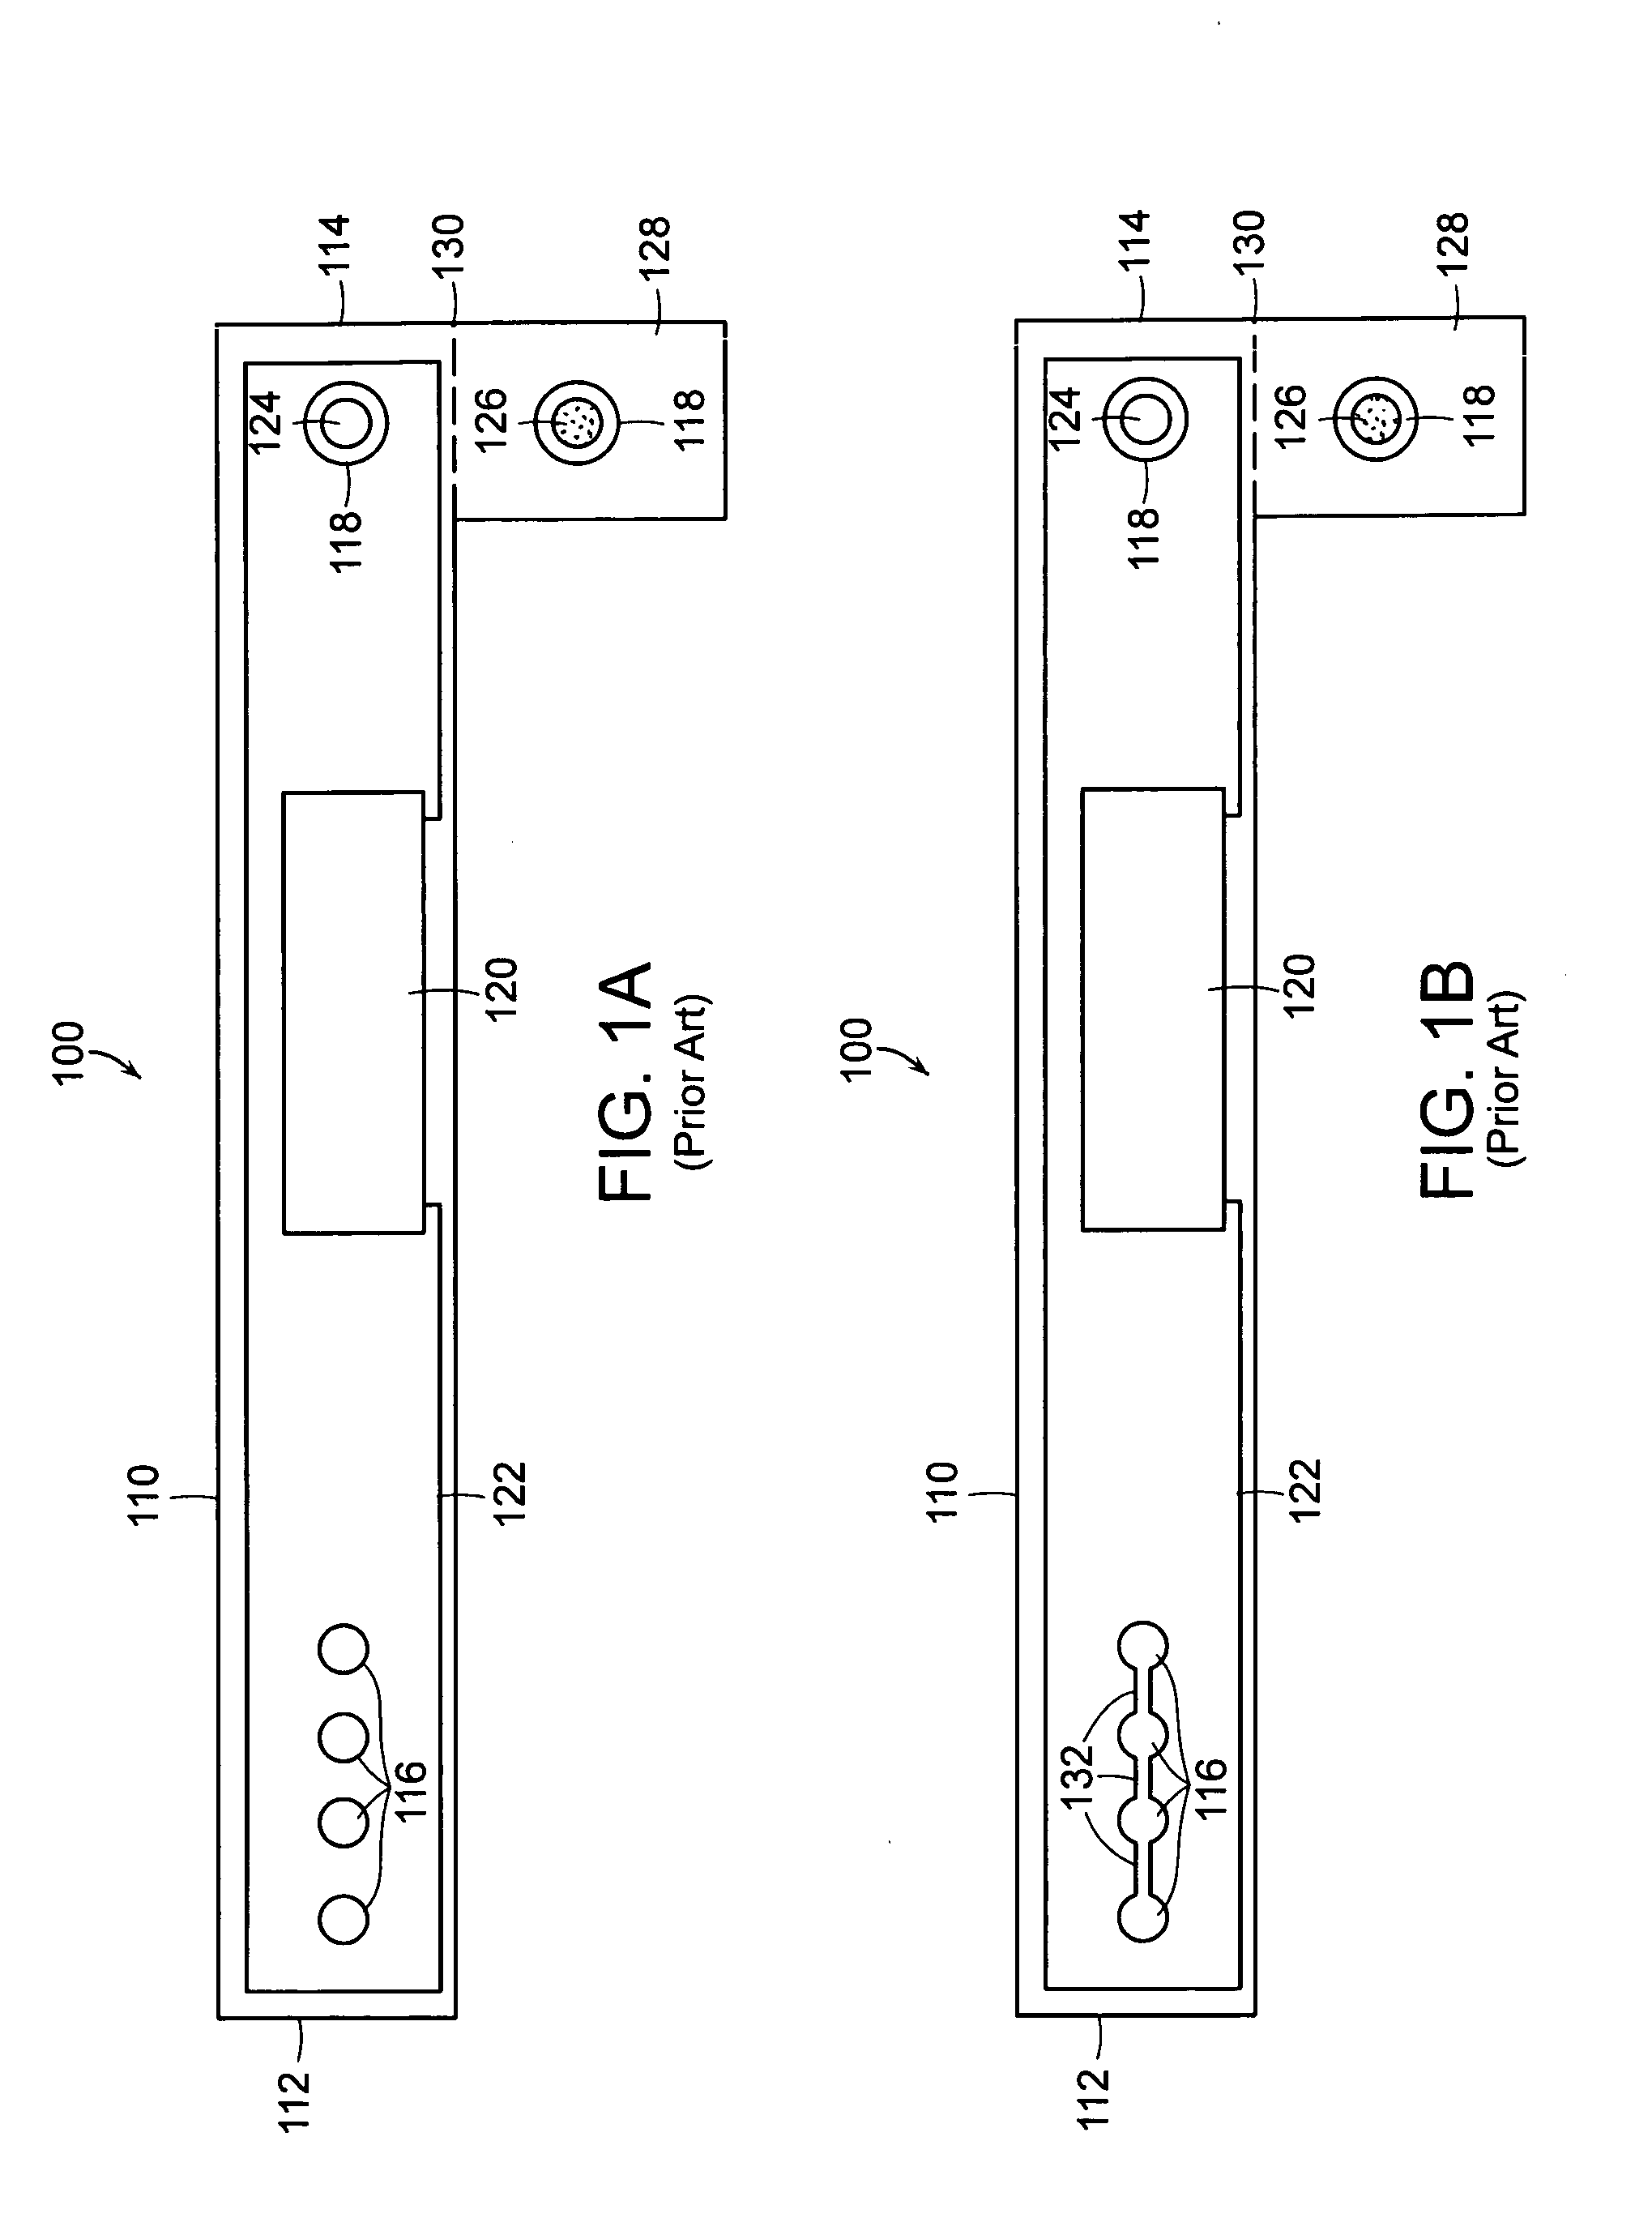 Identification band using serpentine paths to detect tampering